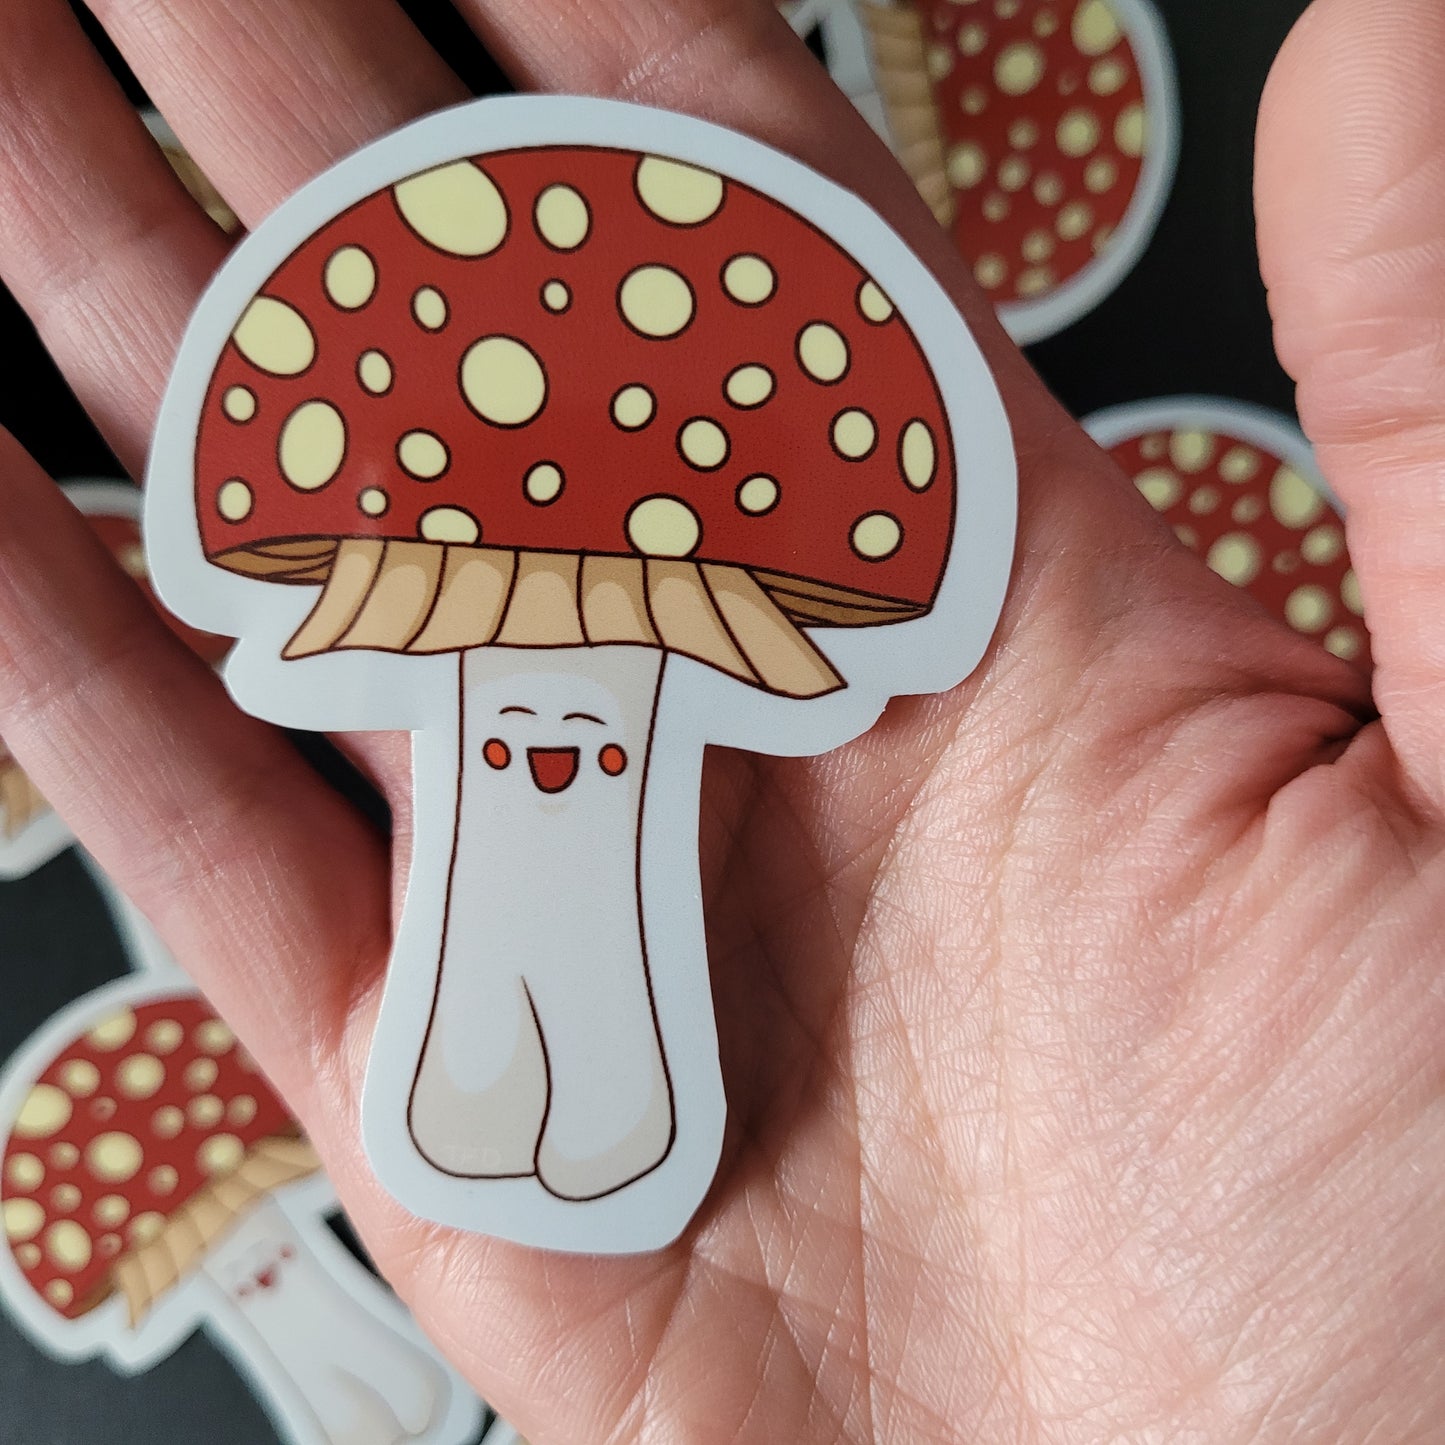 amanita muscaria sticker held in palm for size reference